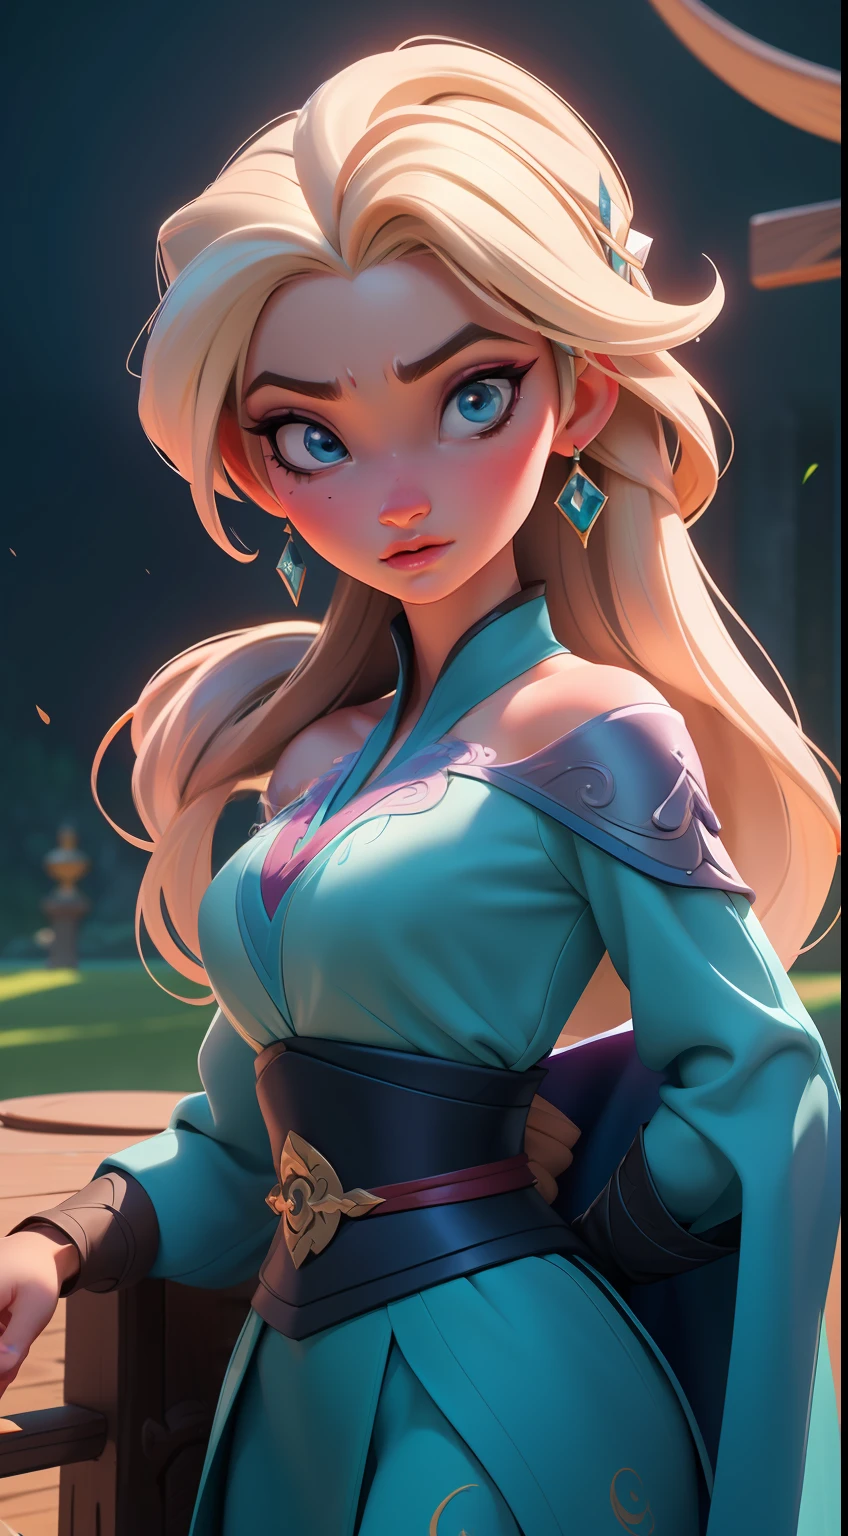 Elsa-Mulan Fusion, Merging models, melting, Mulan&#39;s clothes, 1girl, Beautiful, character, Woman, female, (master part:1.2), (best qualityer:1.2), (standing alone:1.2), ((struggling pose)), ((field of battle)), cinemactic, perfects eyes, perfect  skin, perfect lighting, sorrido, Lumiere, Farbe, texturized skin, detail, Beauthfull, wonder wonder wonder wonder wonder wonder wonder wonder wonder wonder wonder wonder wonder wonder wonder wonder wonder wonder wonder wonder wonder wonder wonder wonder wonder wonder wonder wonder wonder wonder wonder wonder, ultra detali, face perfect